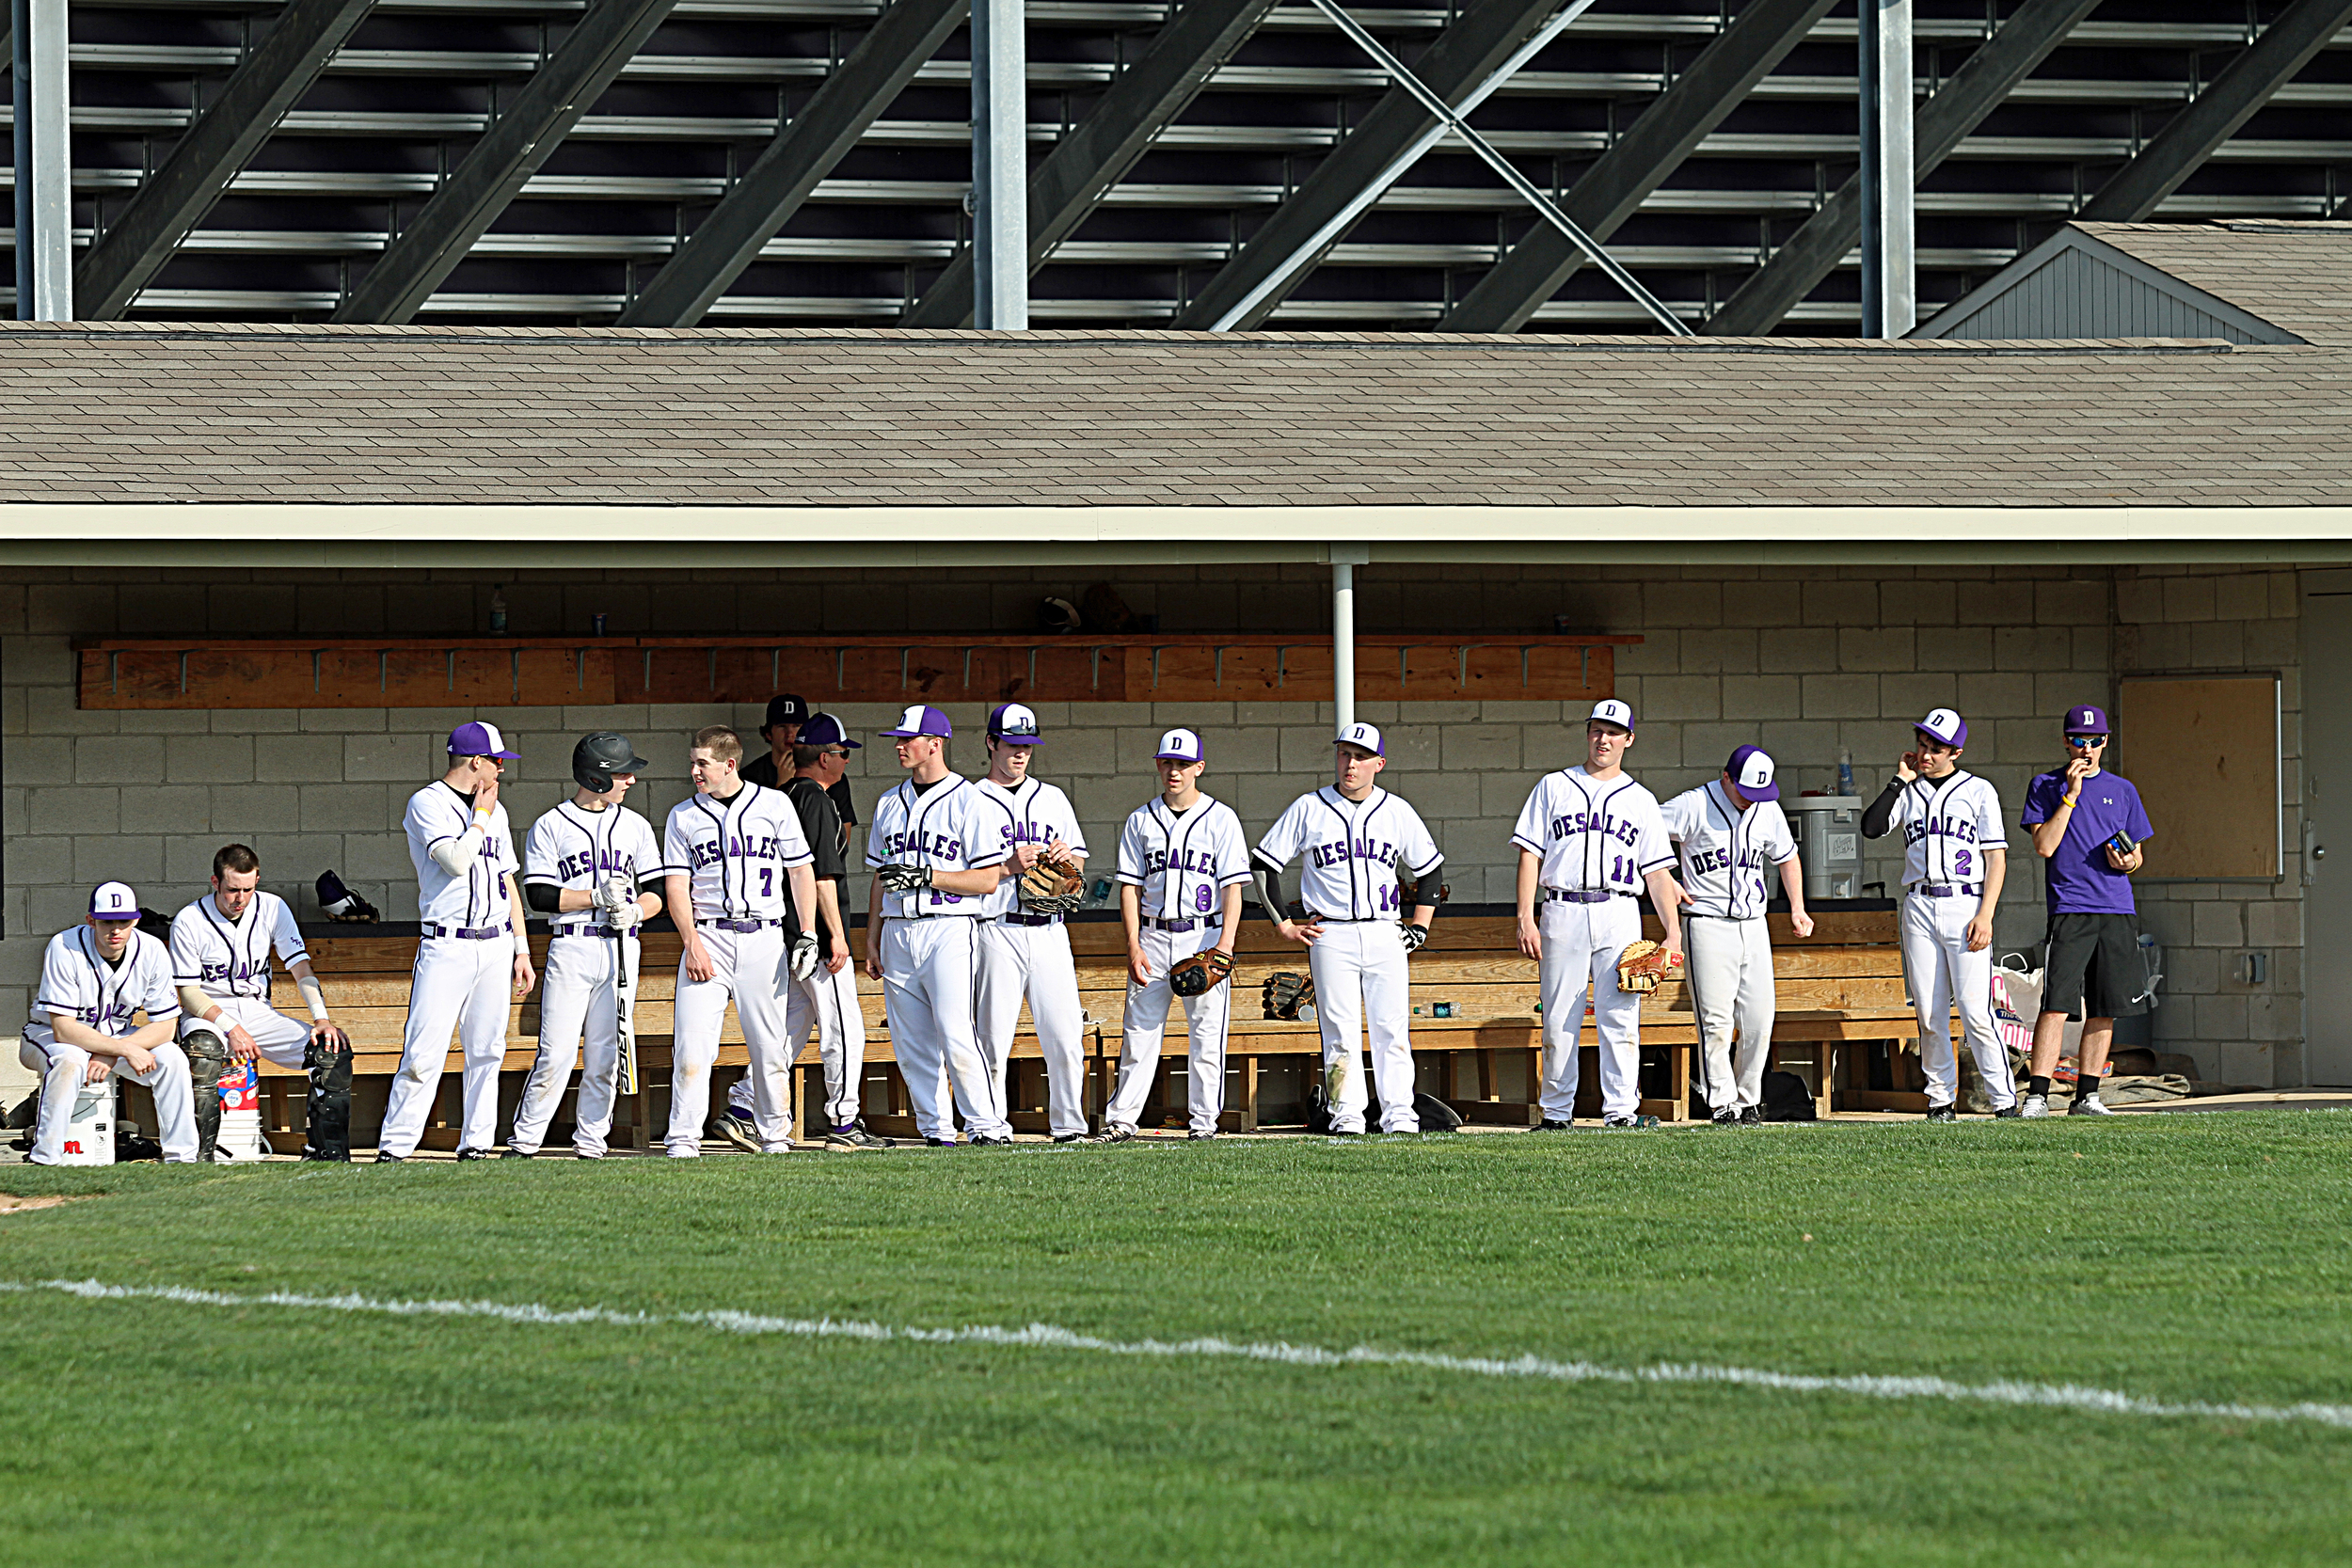 The Stallions look on from their home dugout